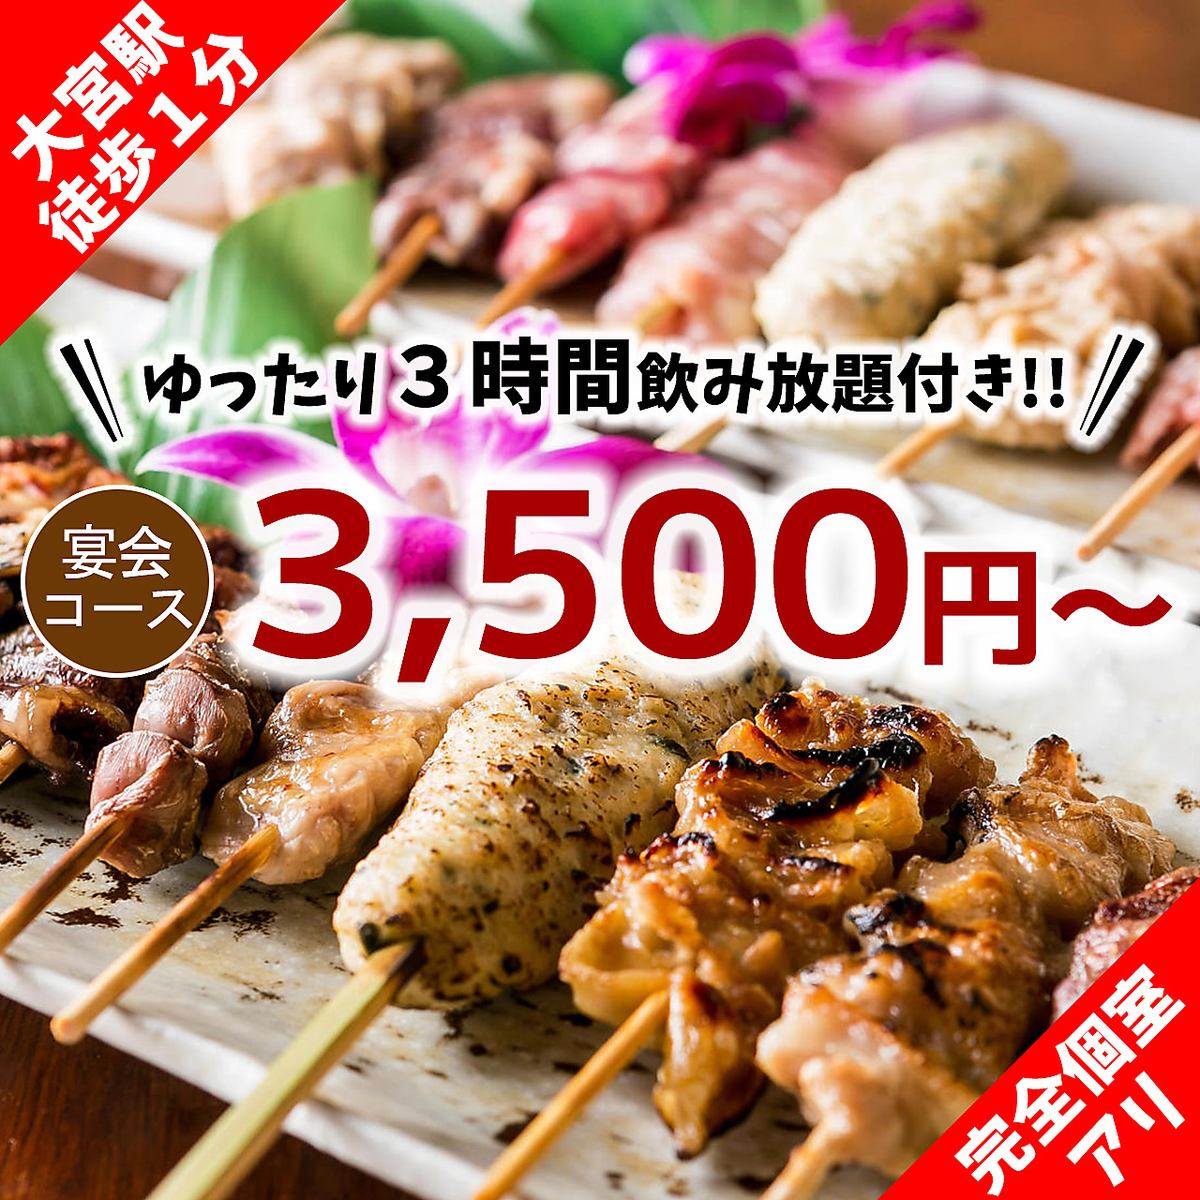 Relaxed 3H all-you-can-drink banquet from 3500 yen! 2.5H system on weekends ♪